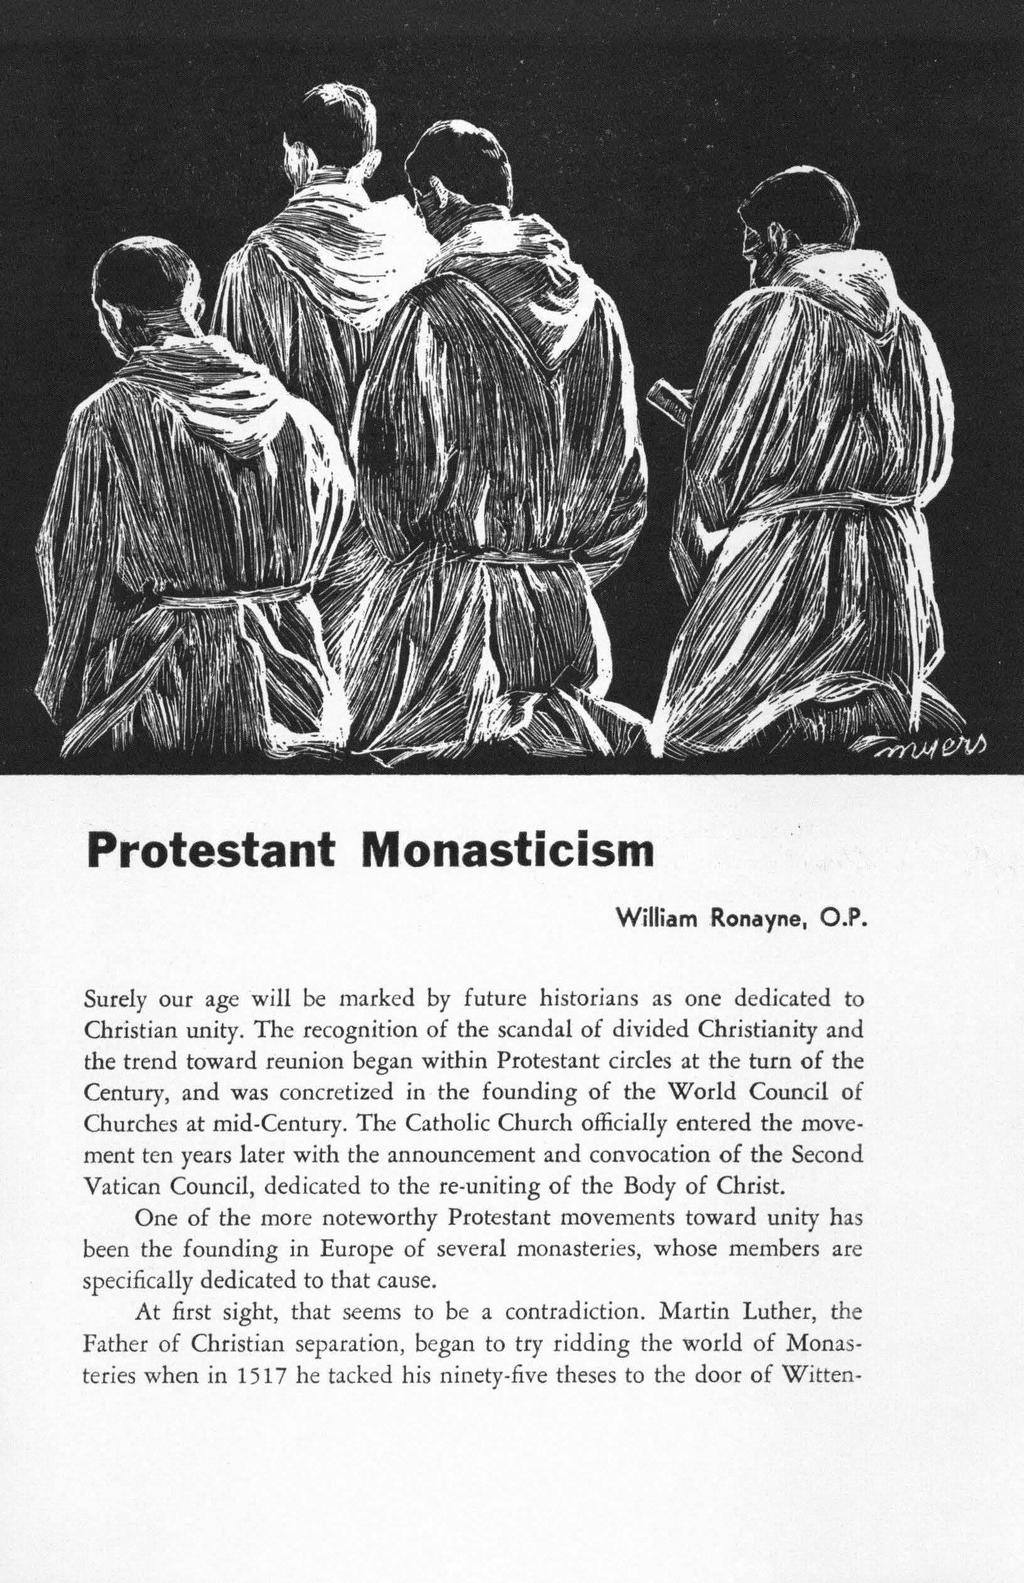 Protestant Monasticism William Ronayne, O.P. Surely our age will be marked by future historians as one dedicated to Christian unity.